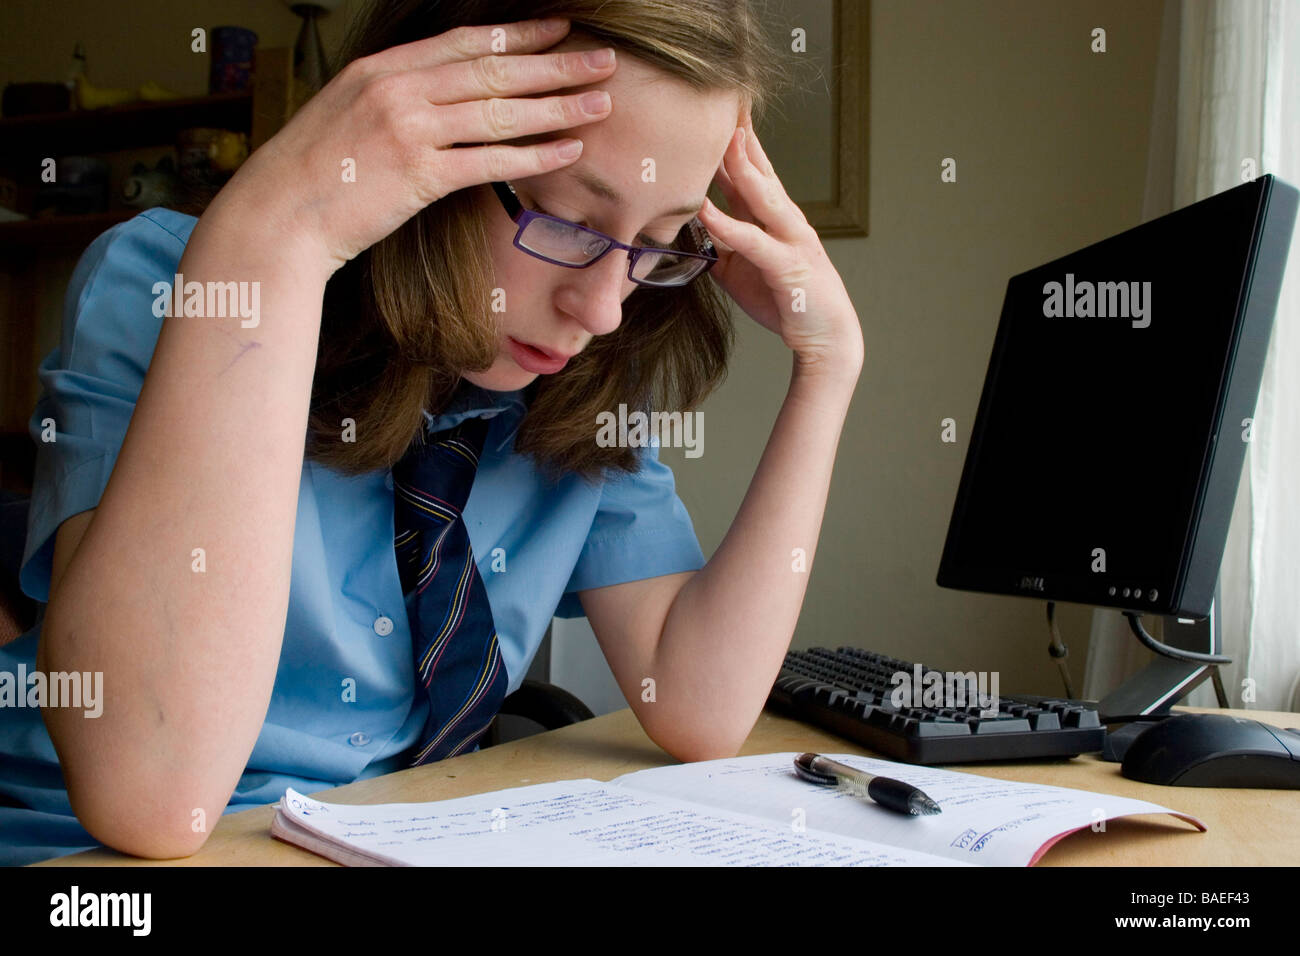 school child concentrating on her homework Stock Photo